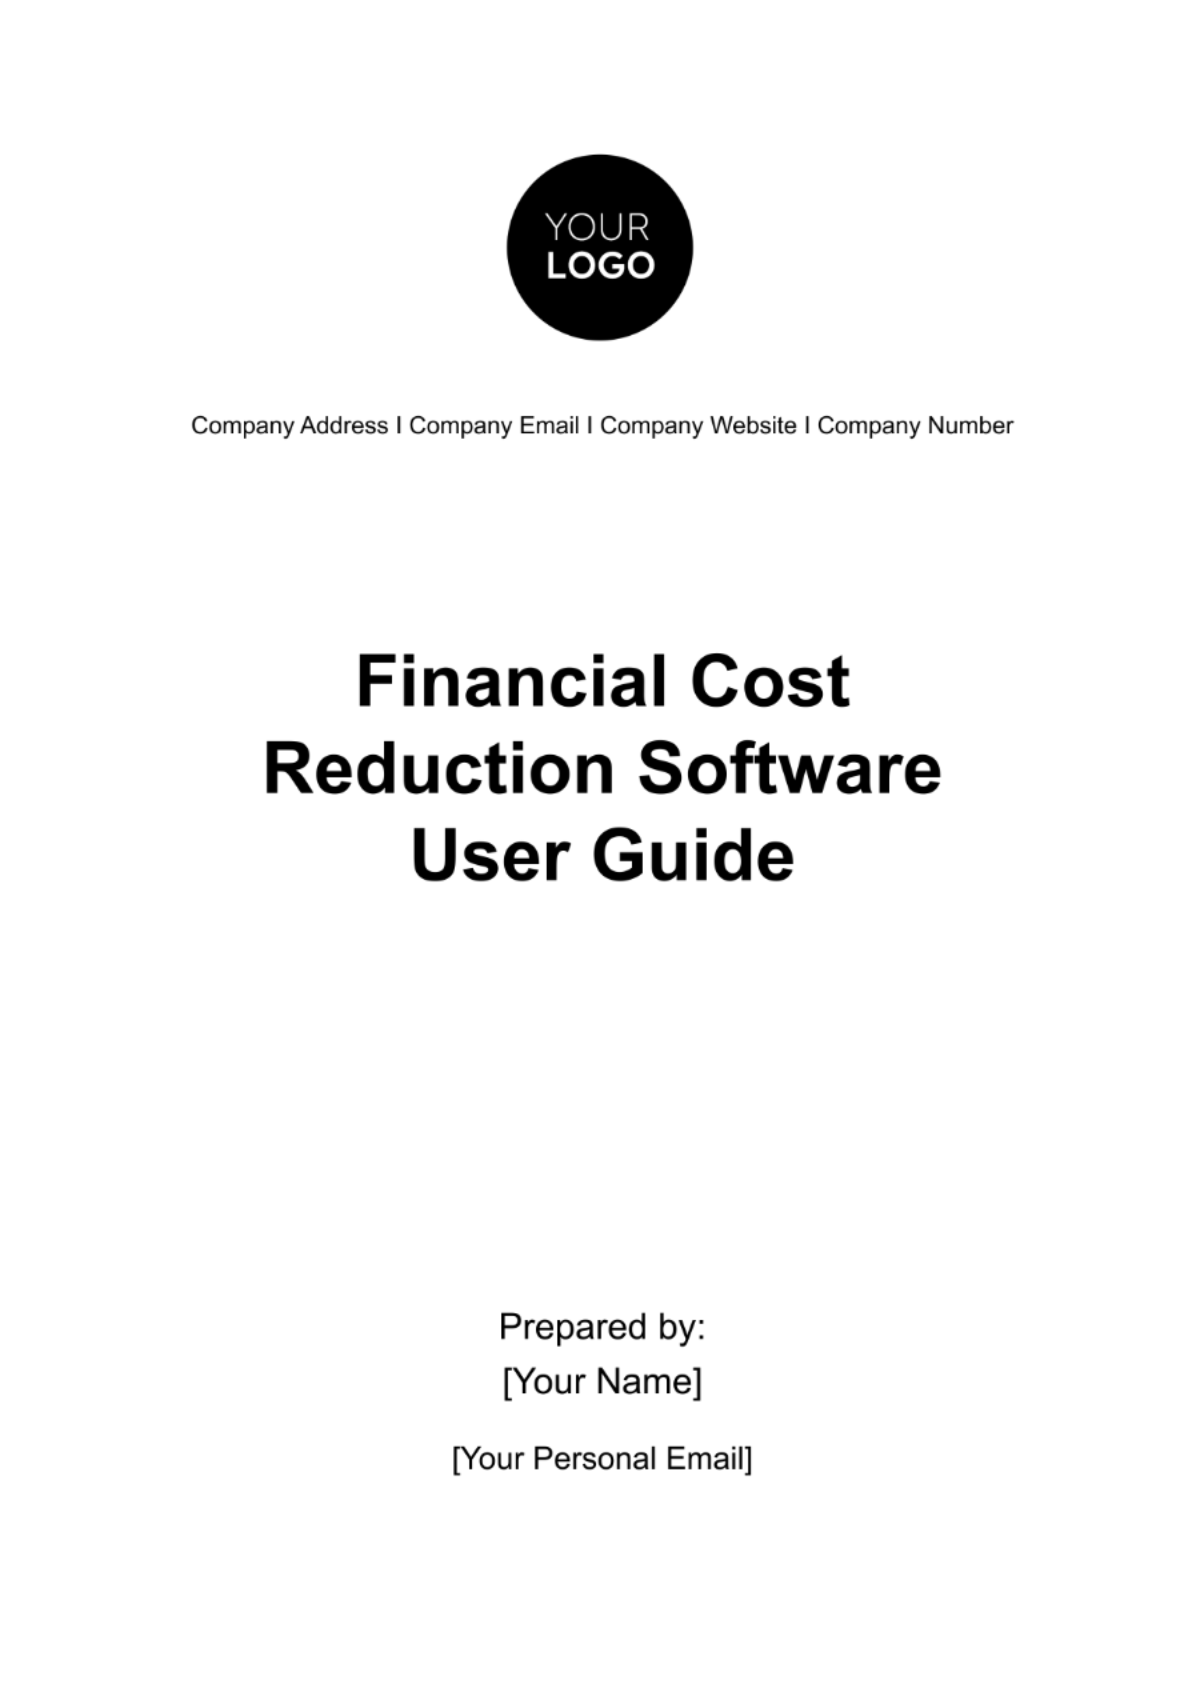 Financial Cost Reduction Software User Guide Template